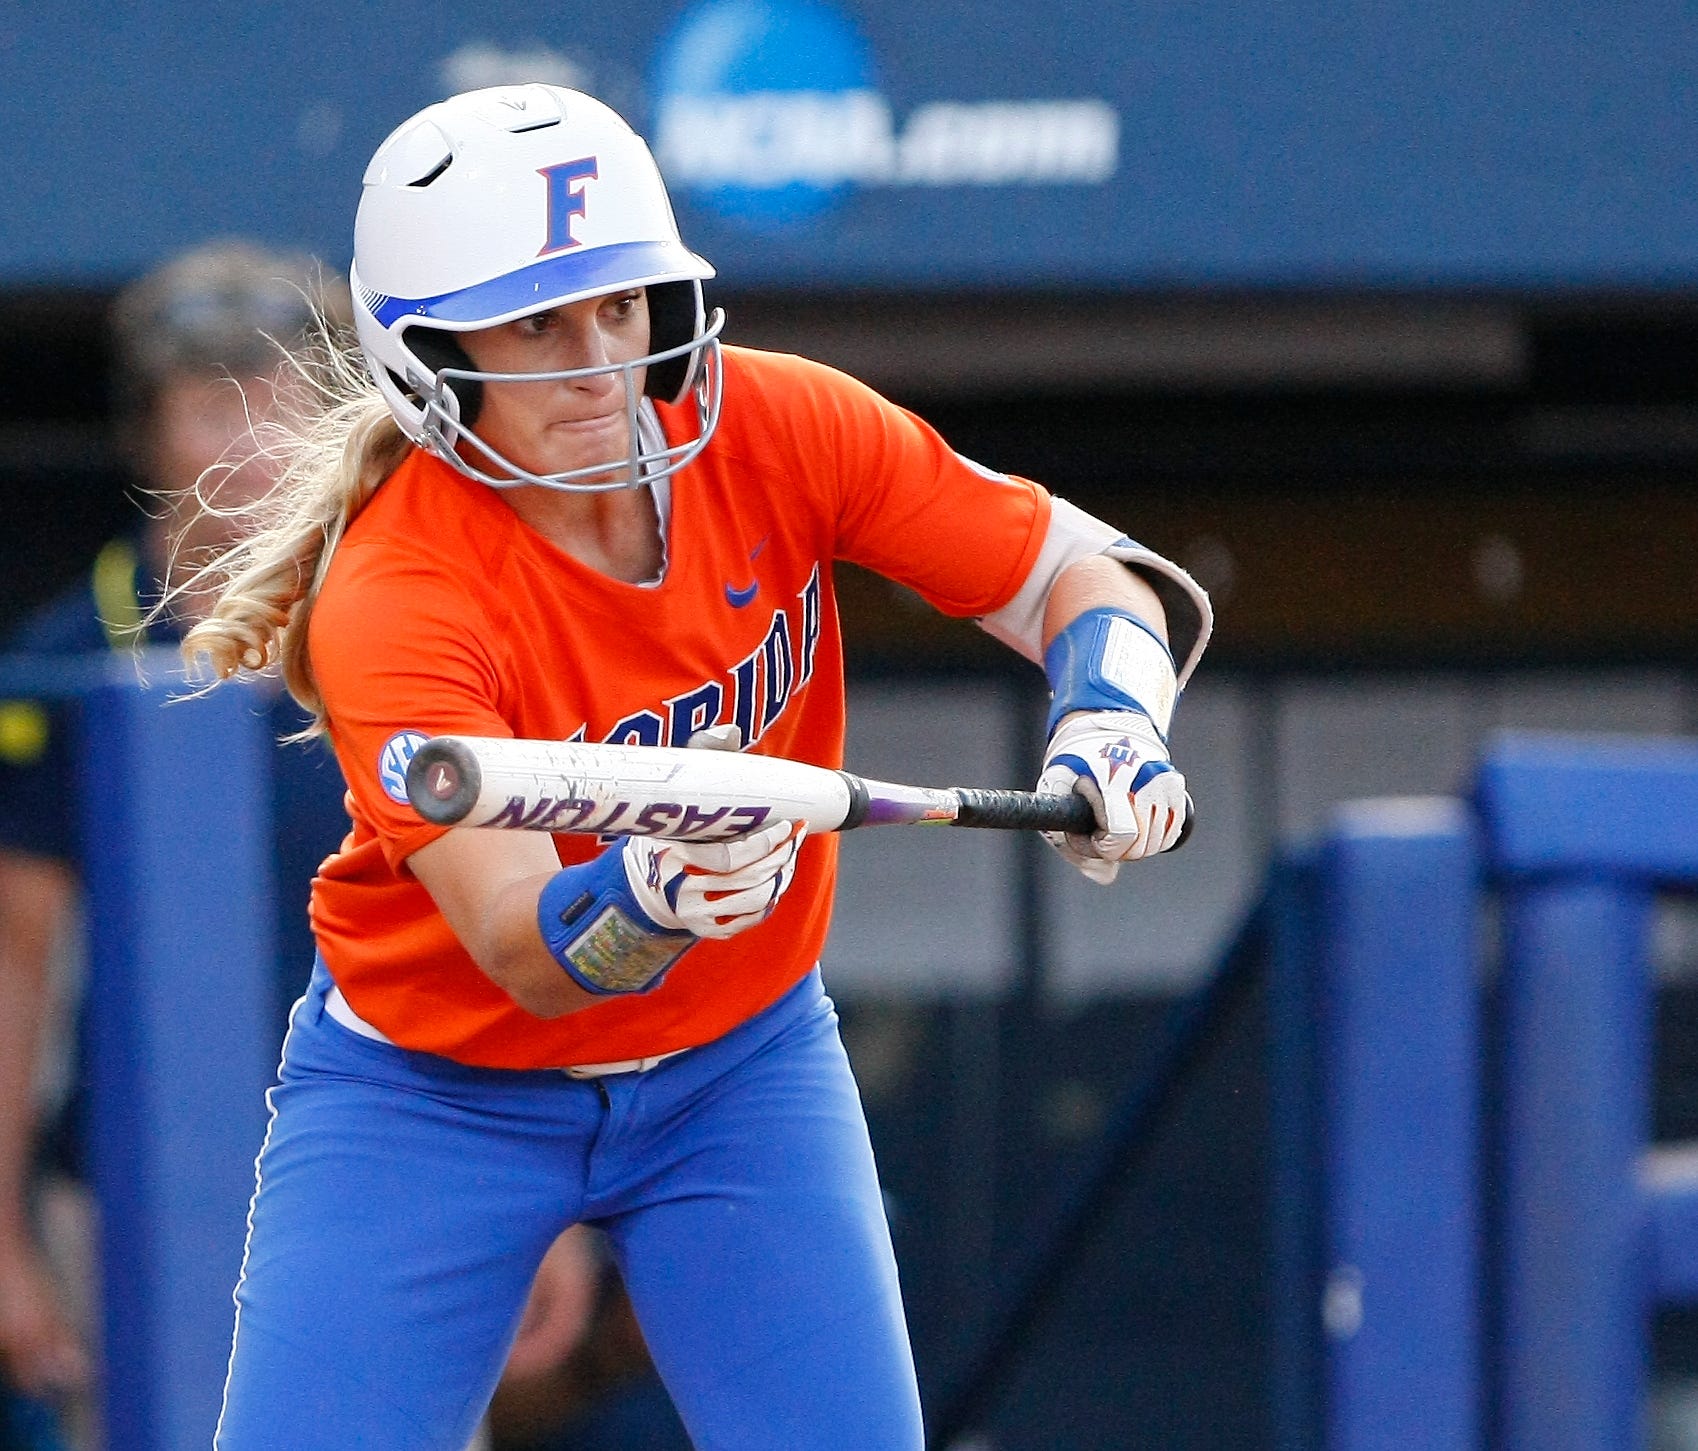 Top-seeded Florida chases third NCAA softball title in a row | abc10.com